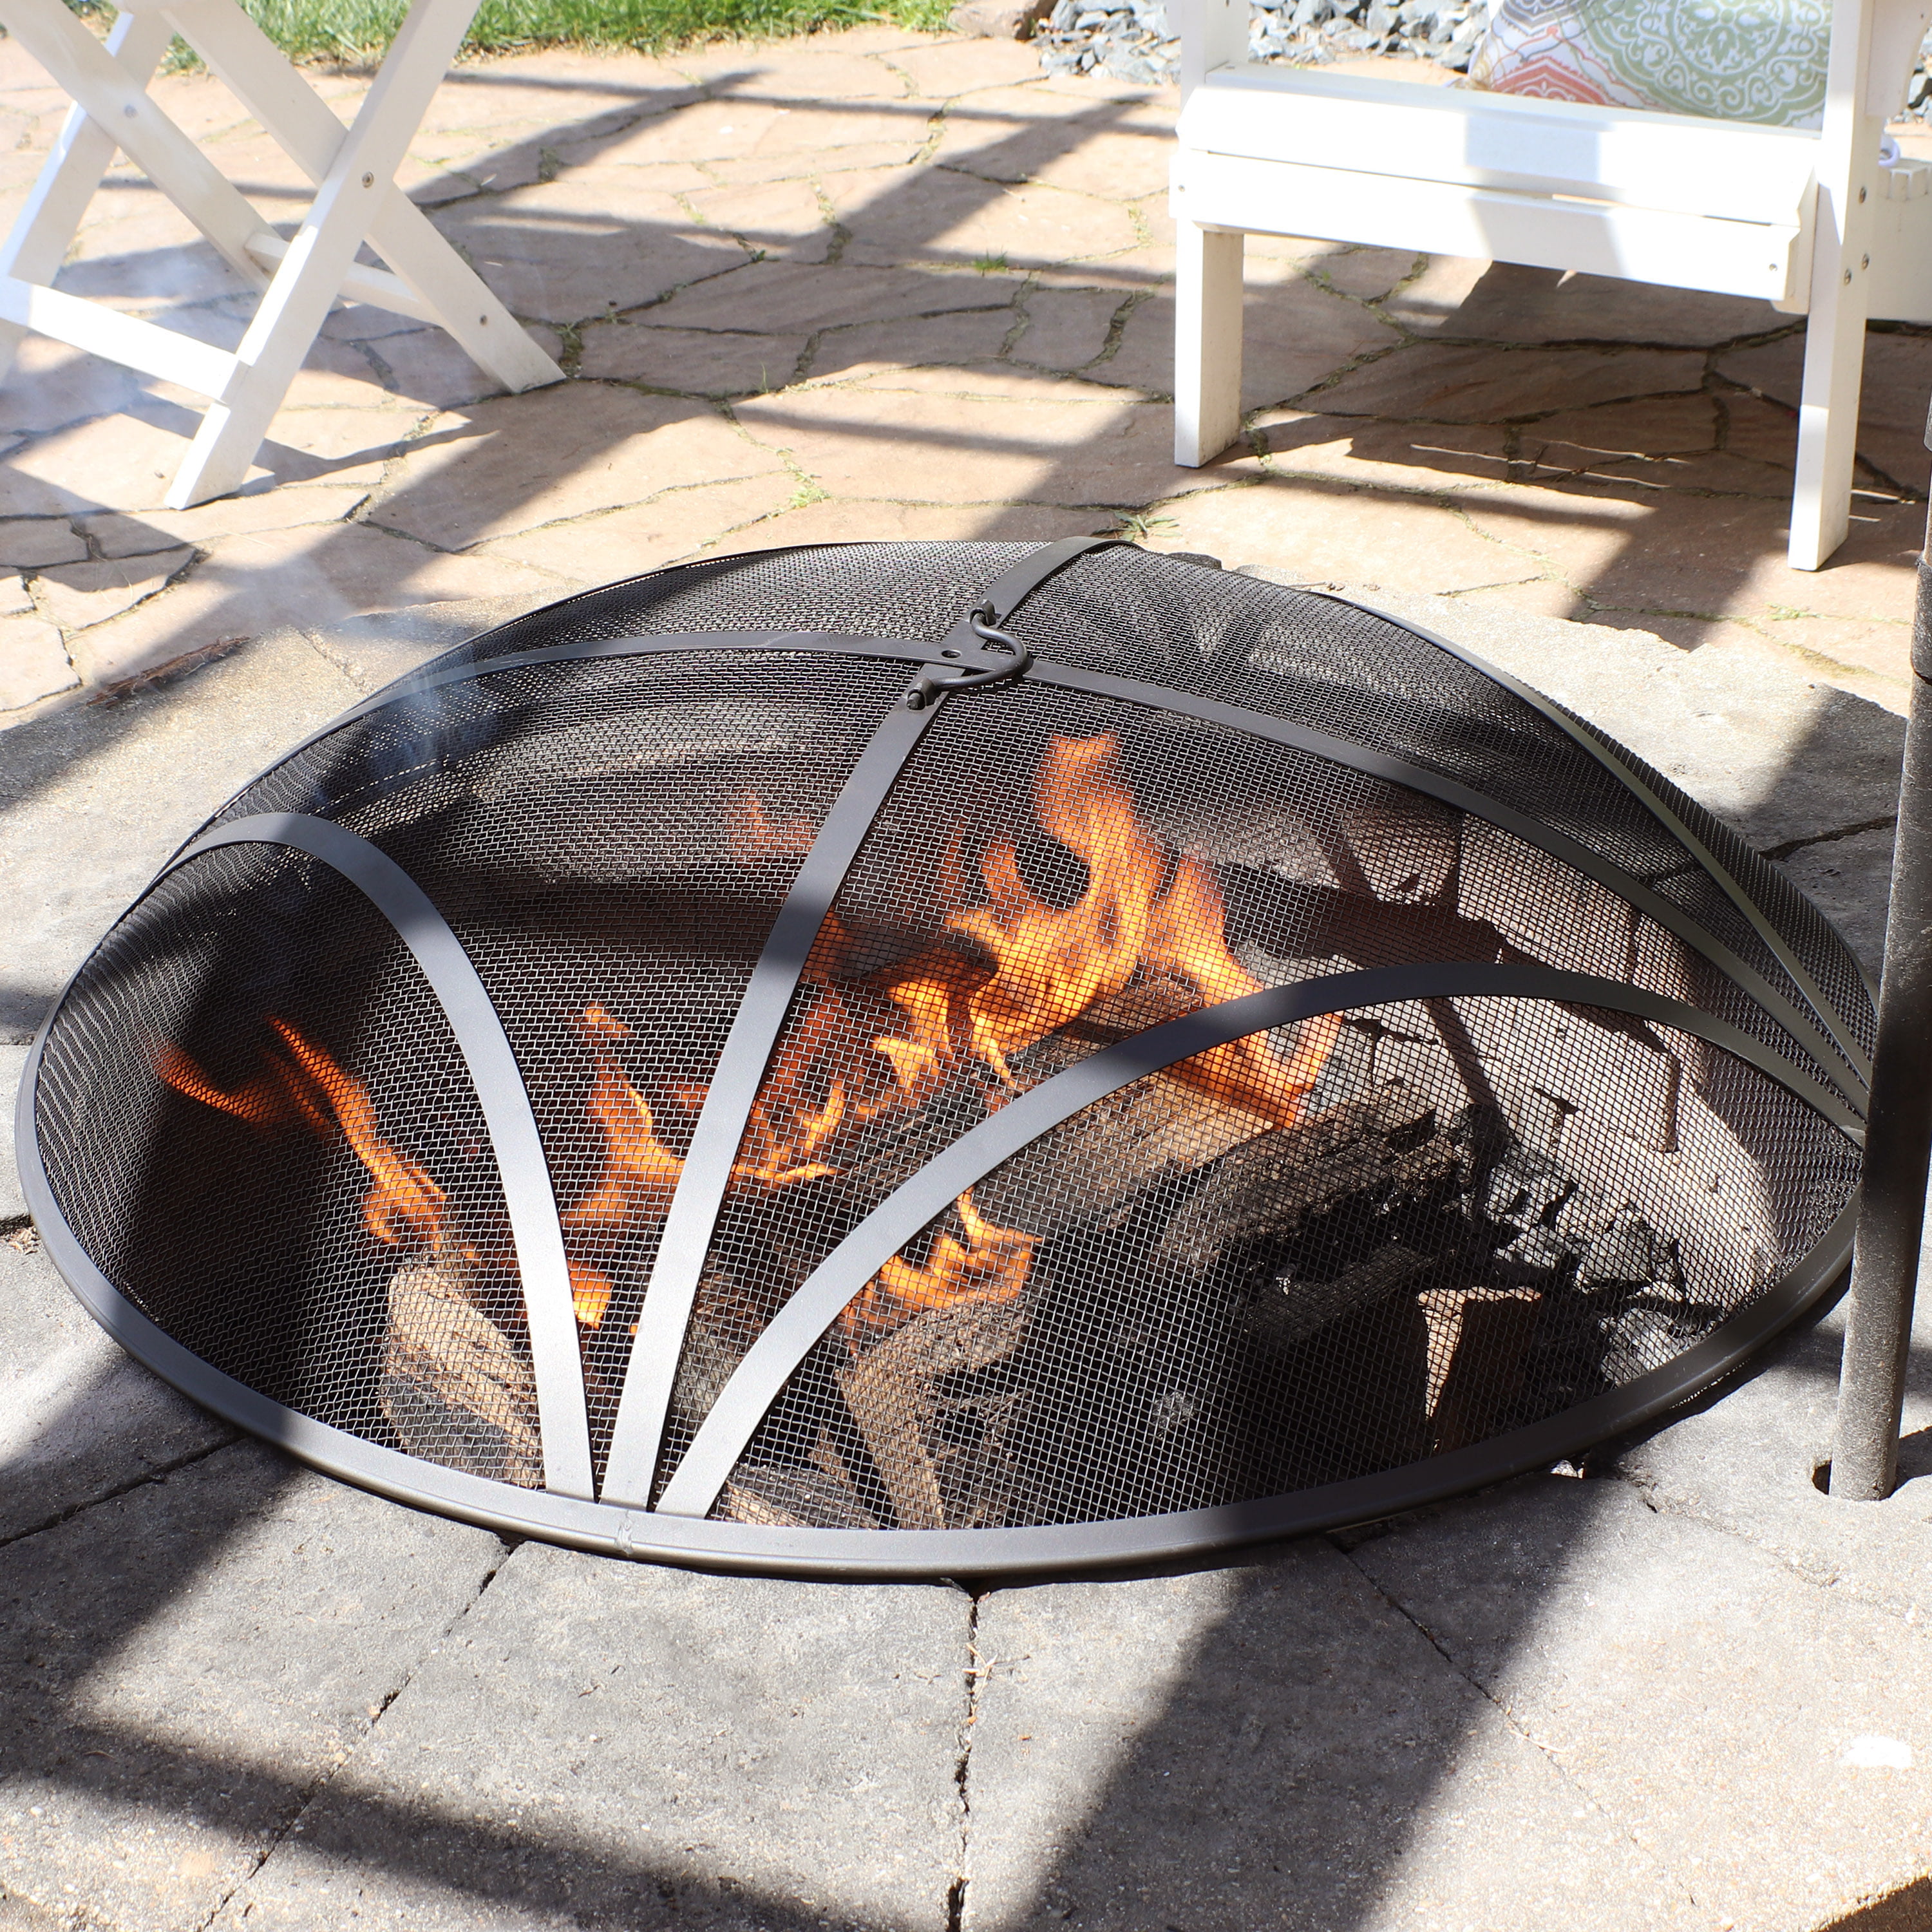 Sunnydaze Reinforced Steel Mesh Spark, How To Make A Fire Pit Screen Cover